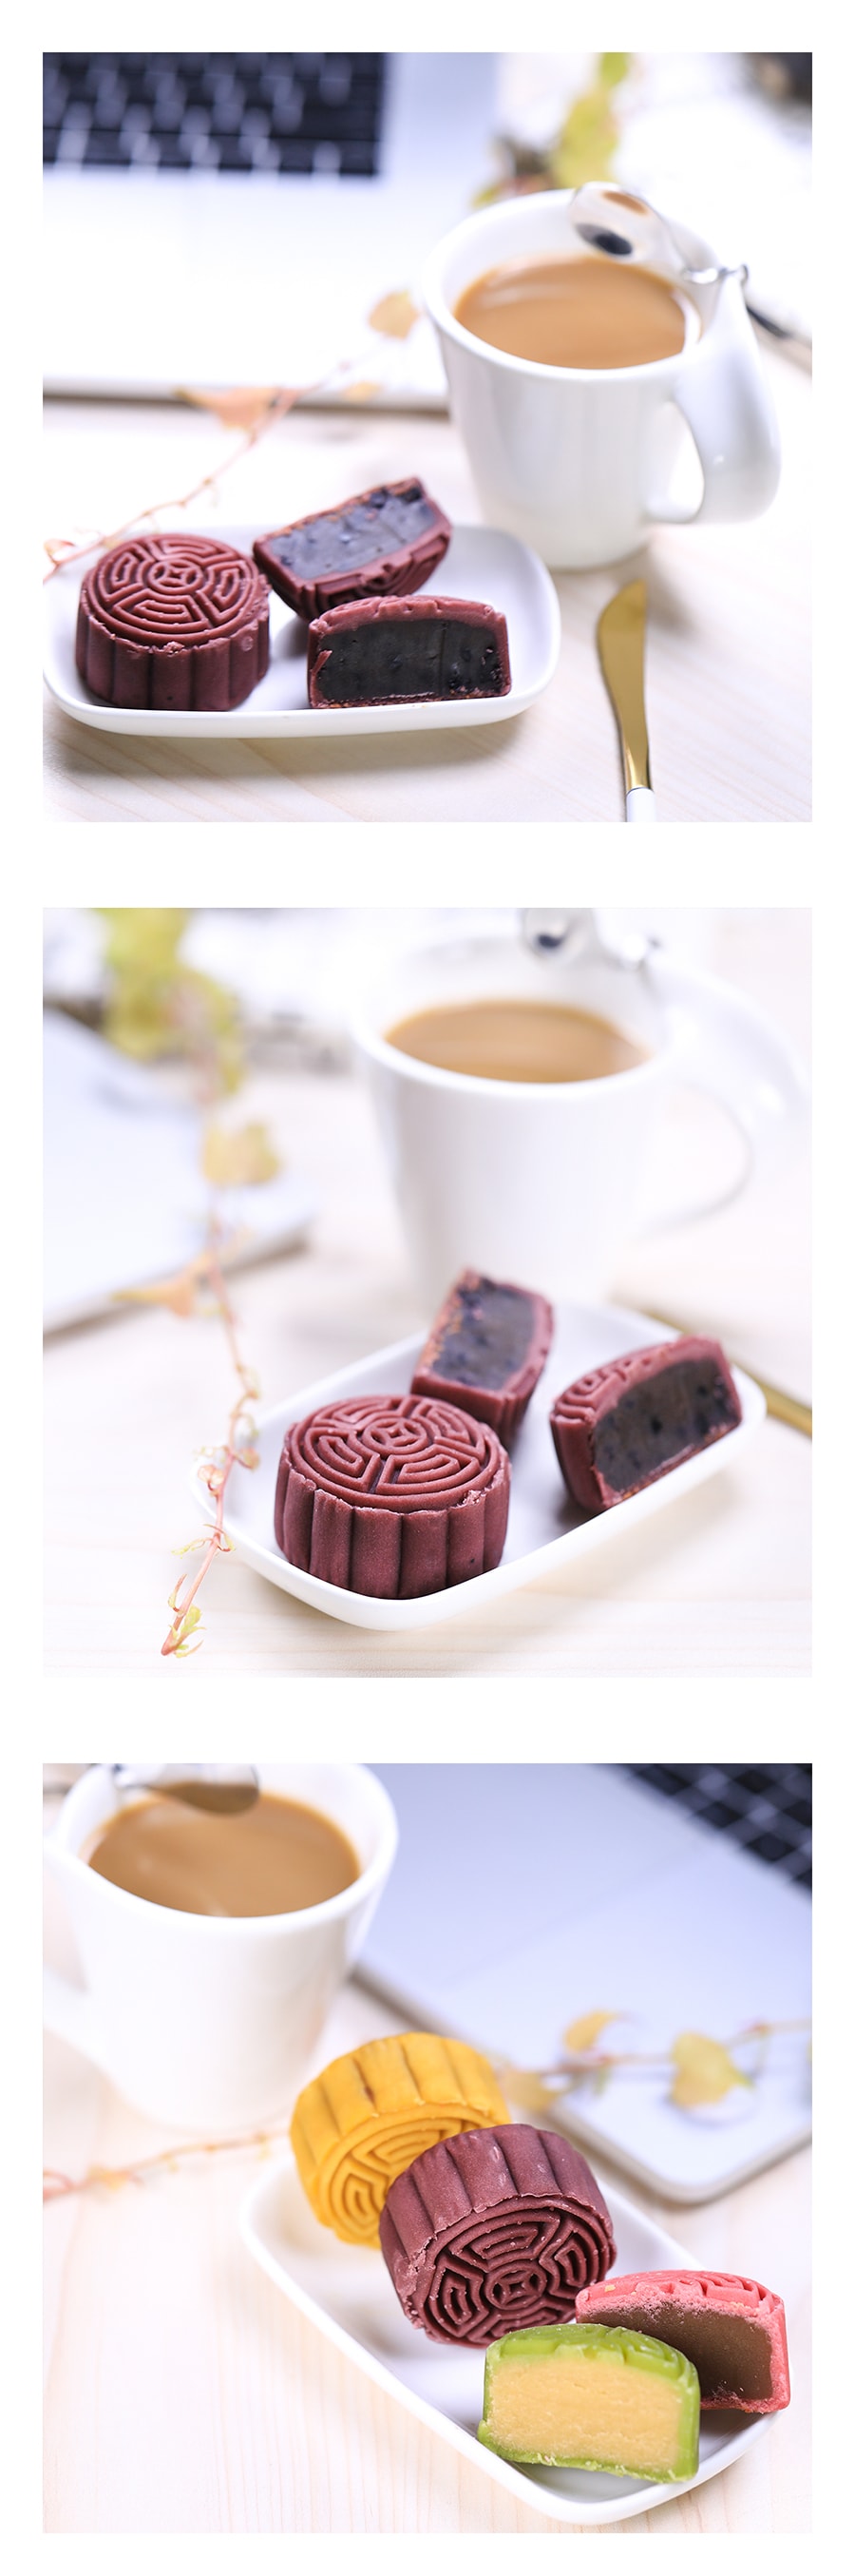 ONETANG Moon Cake Momoyama Style  With Cream & Blue Berry 100g 【Delivery Date: Mid August】